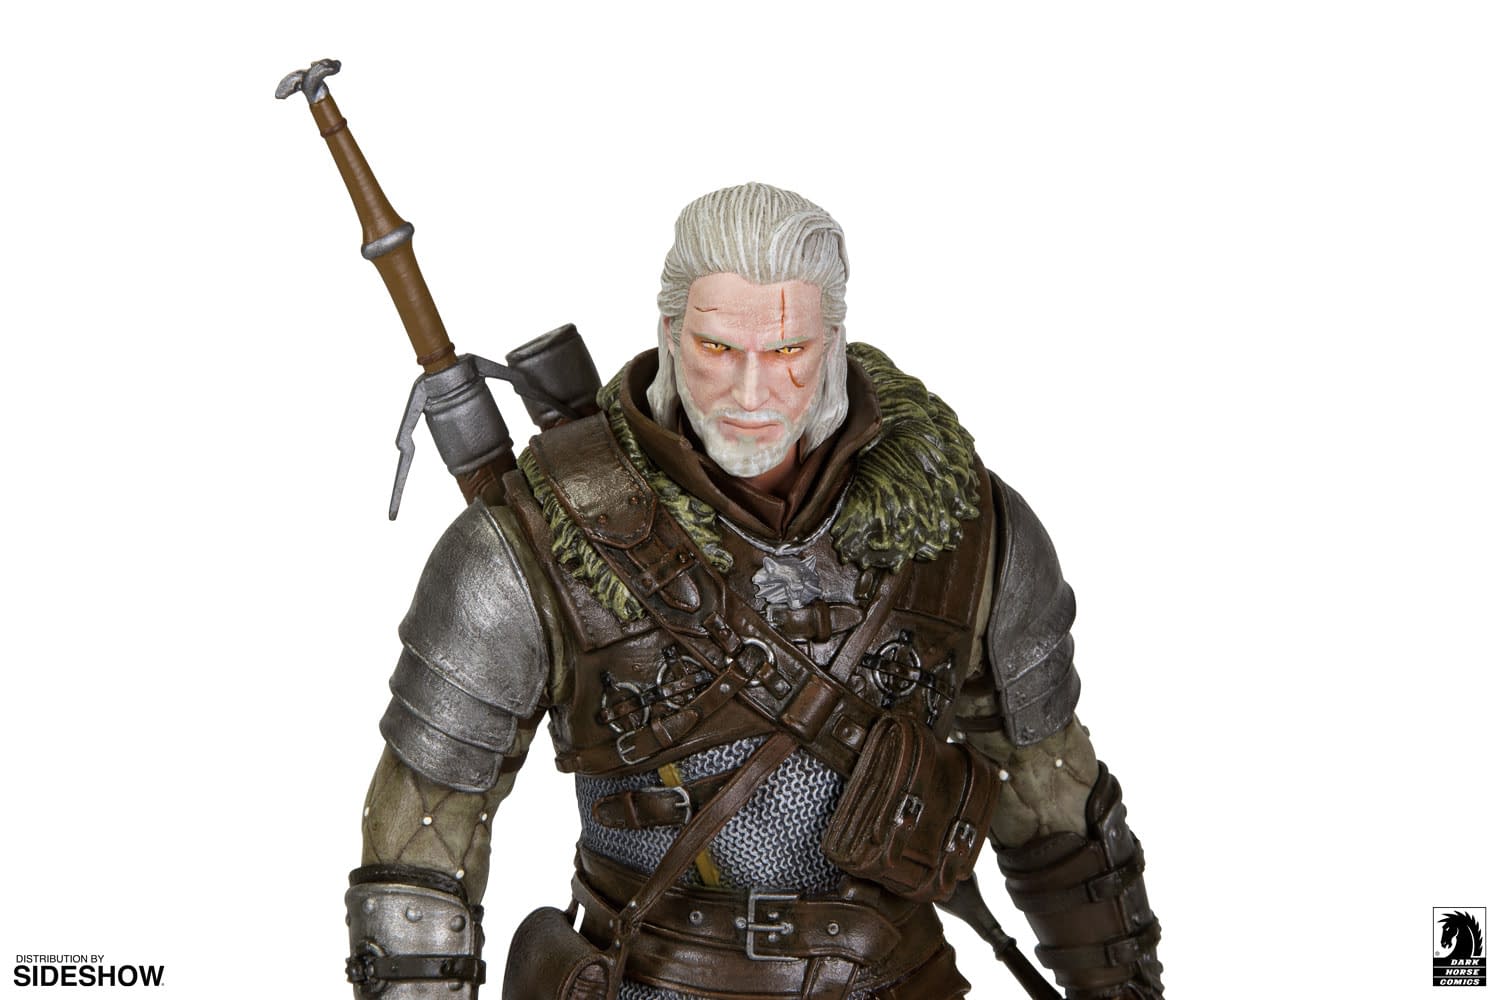 banan Bestil dukke Toss a Coin to These New Witcher Statues From Dark Horse